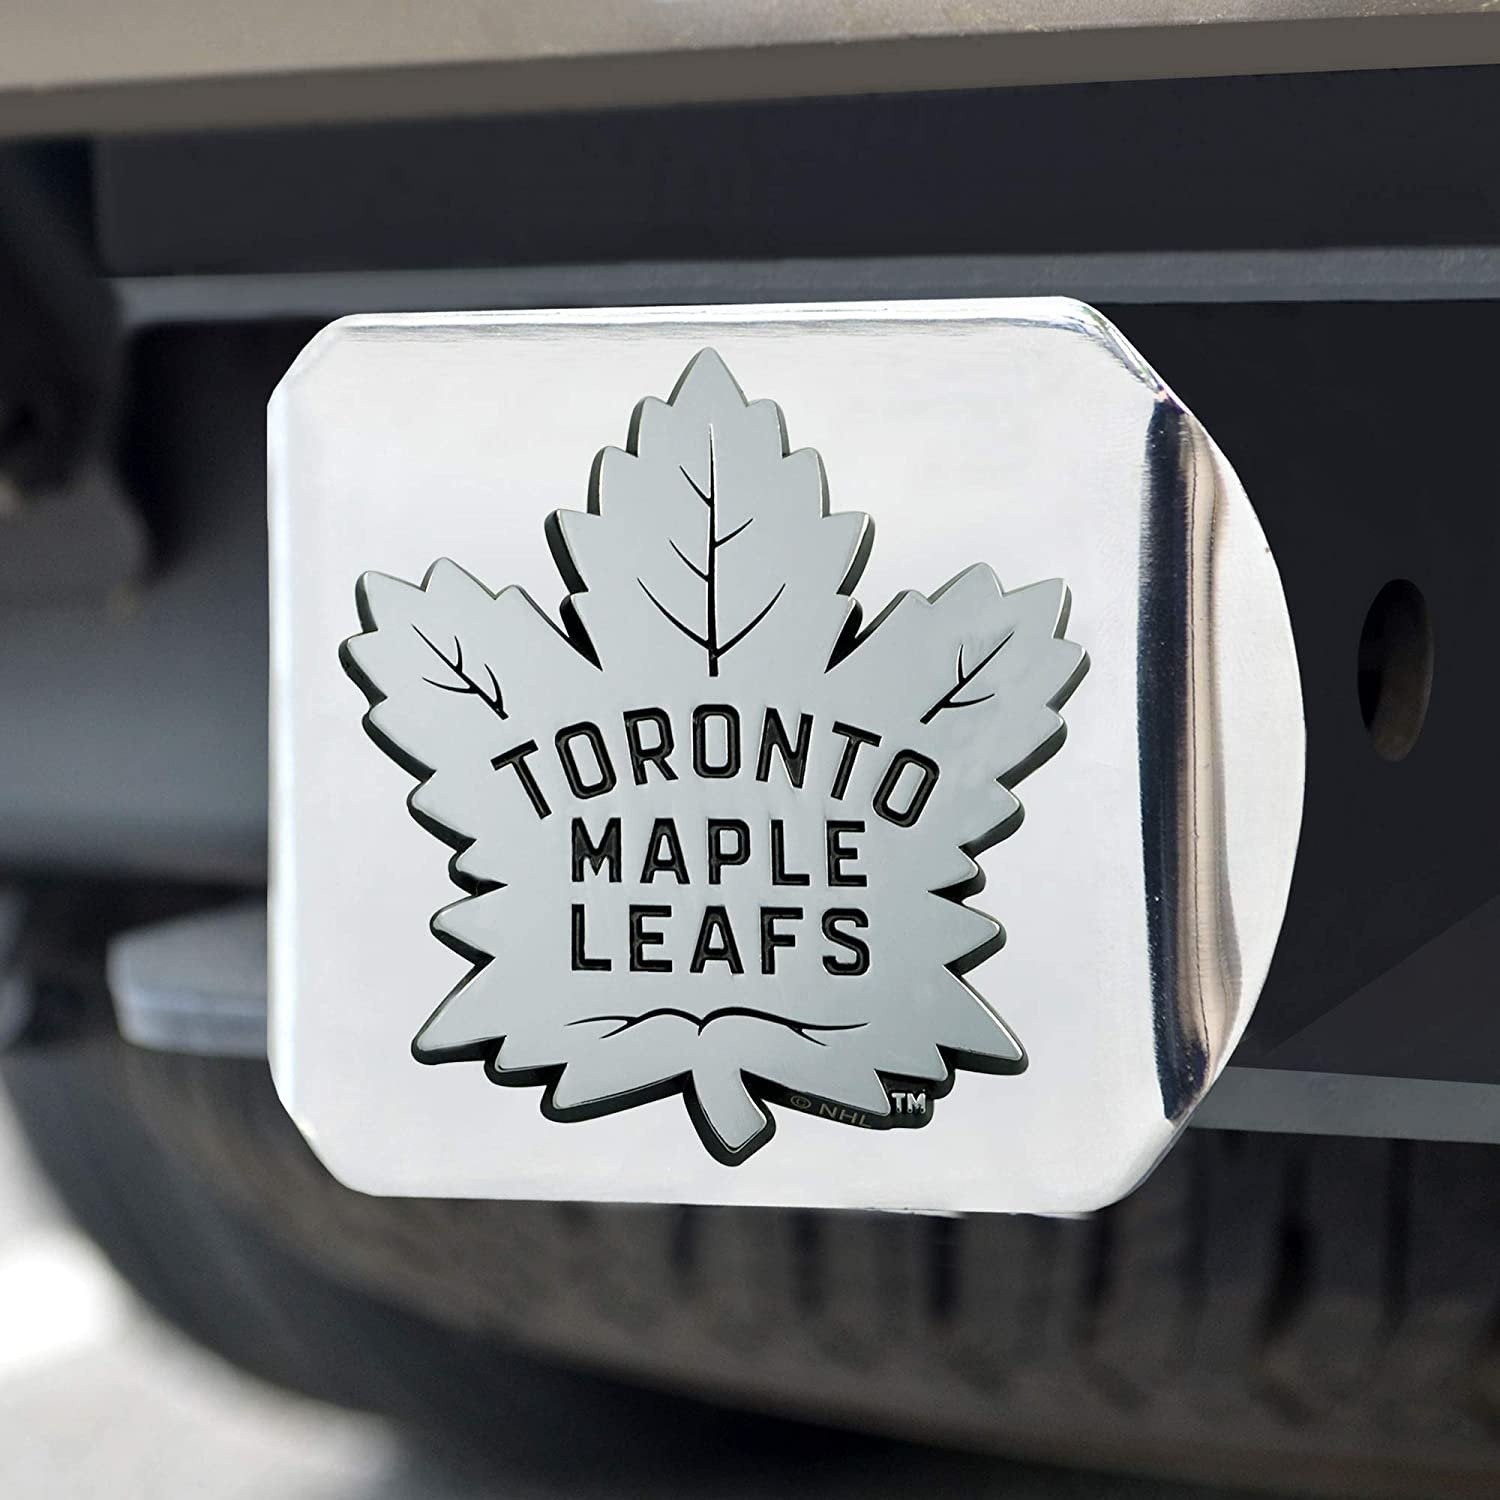 Toronto Maple Leafs Hitch Cover Solid Metal with Raised Chrome Metal Emblem 2" Square Type III